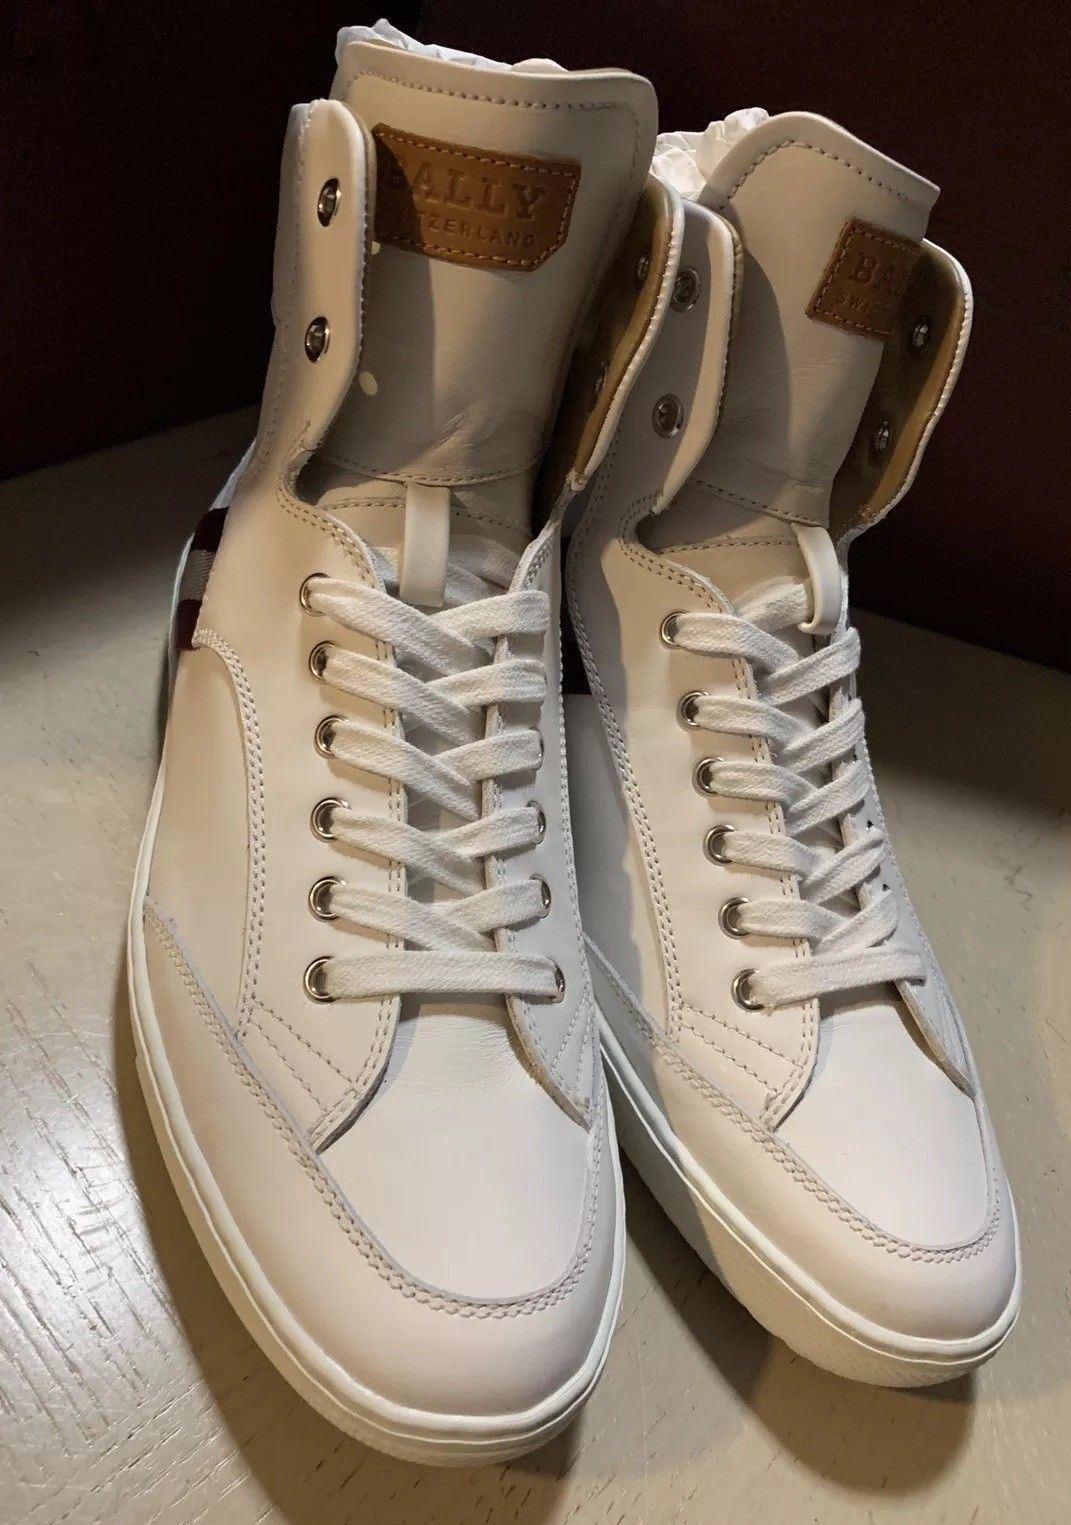 New $650 Bally Men Oldani Leather High-Top Sneakers White 8.5 US Italy